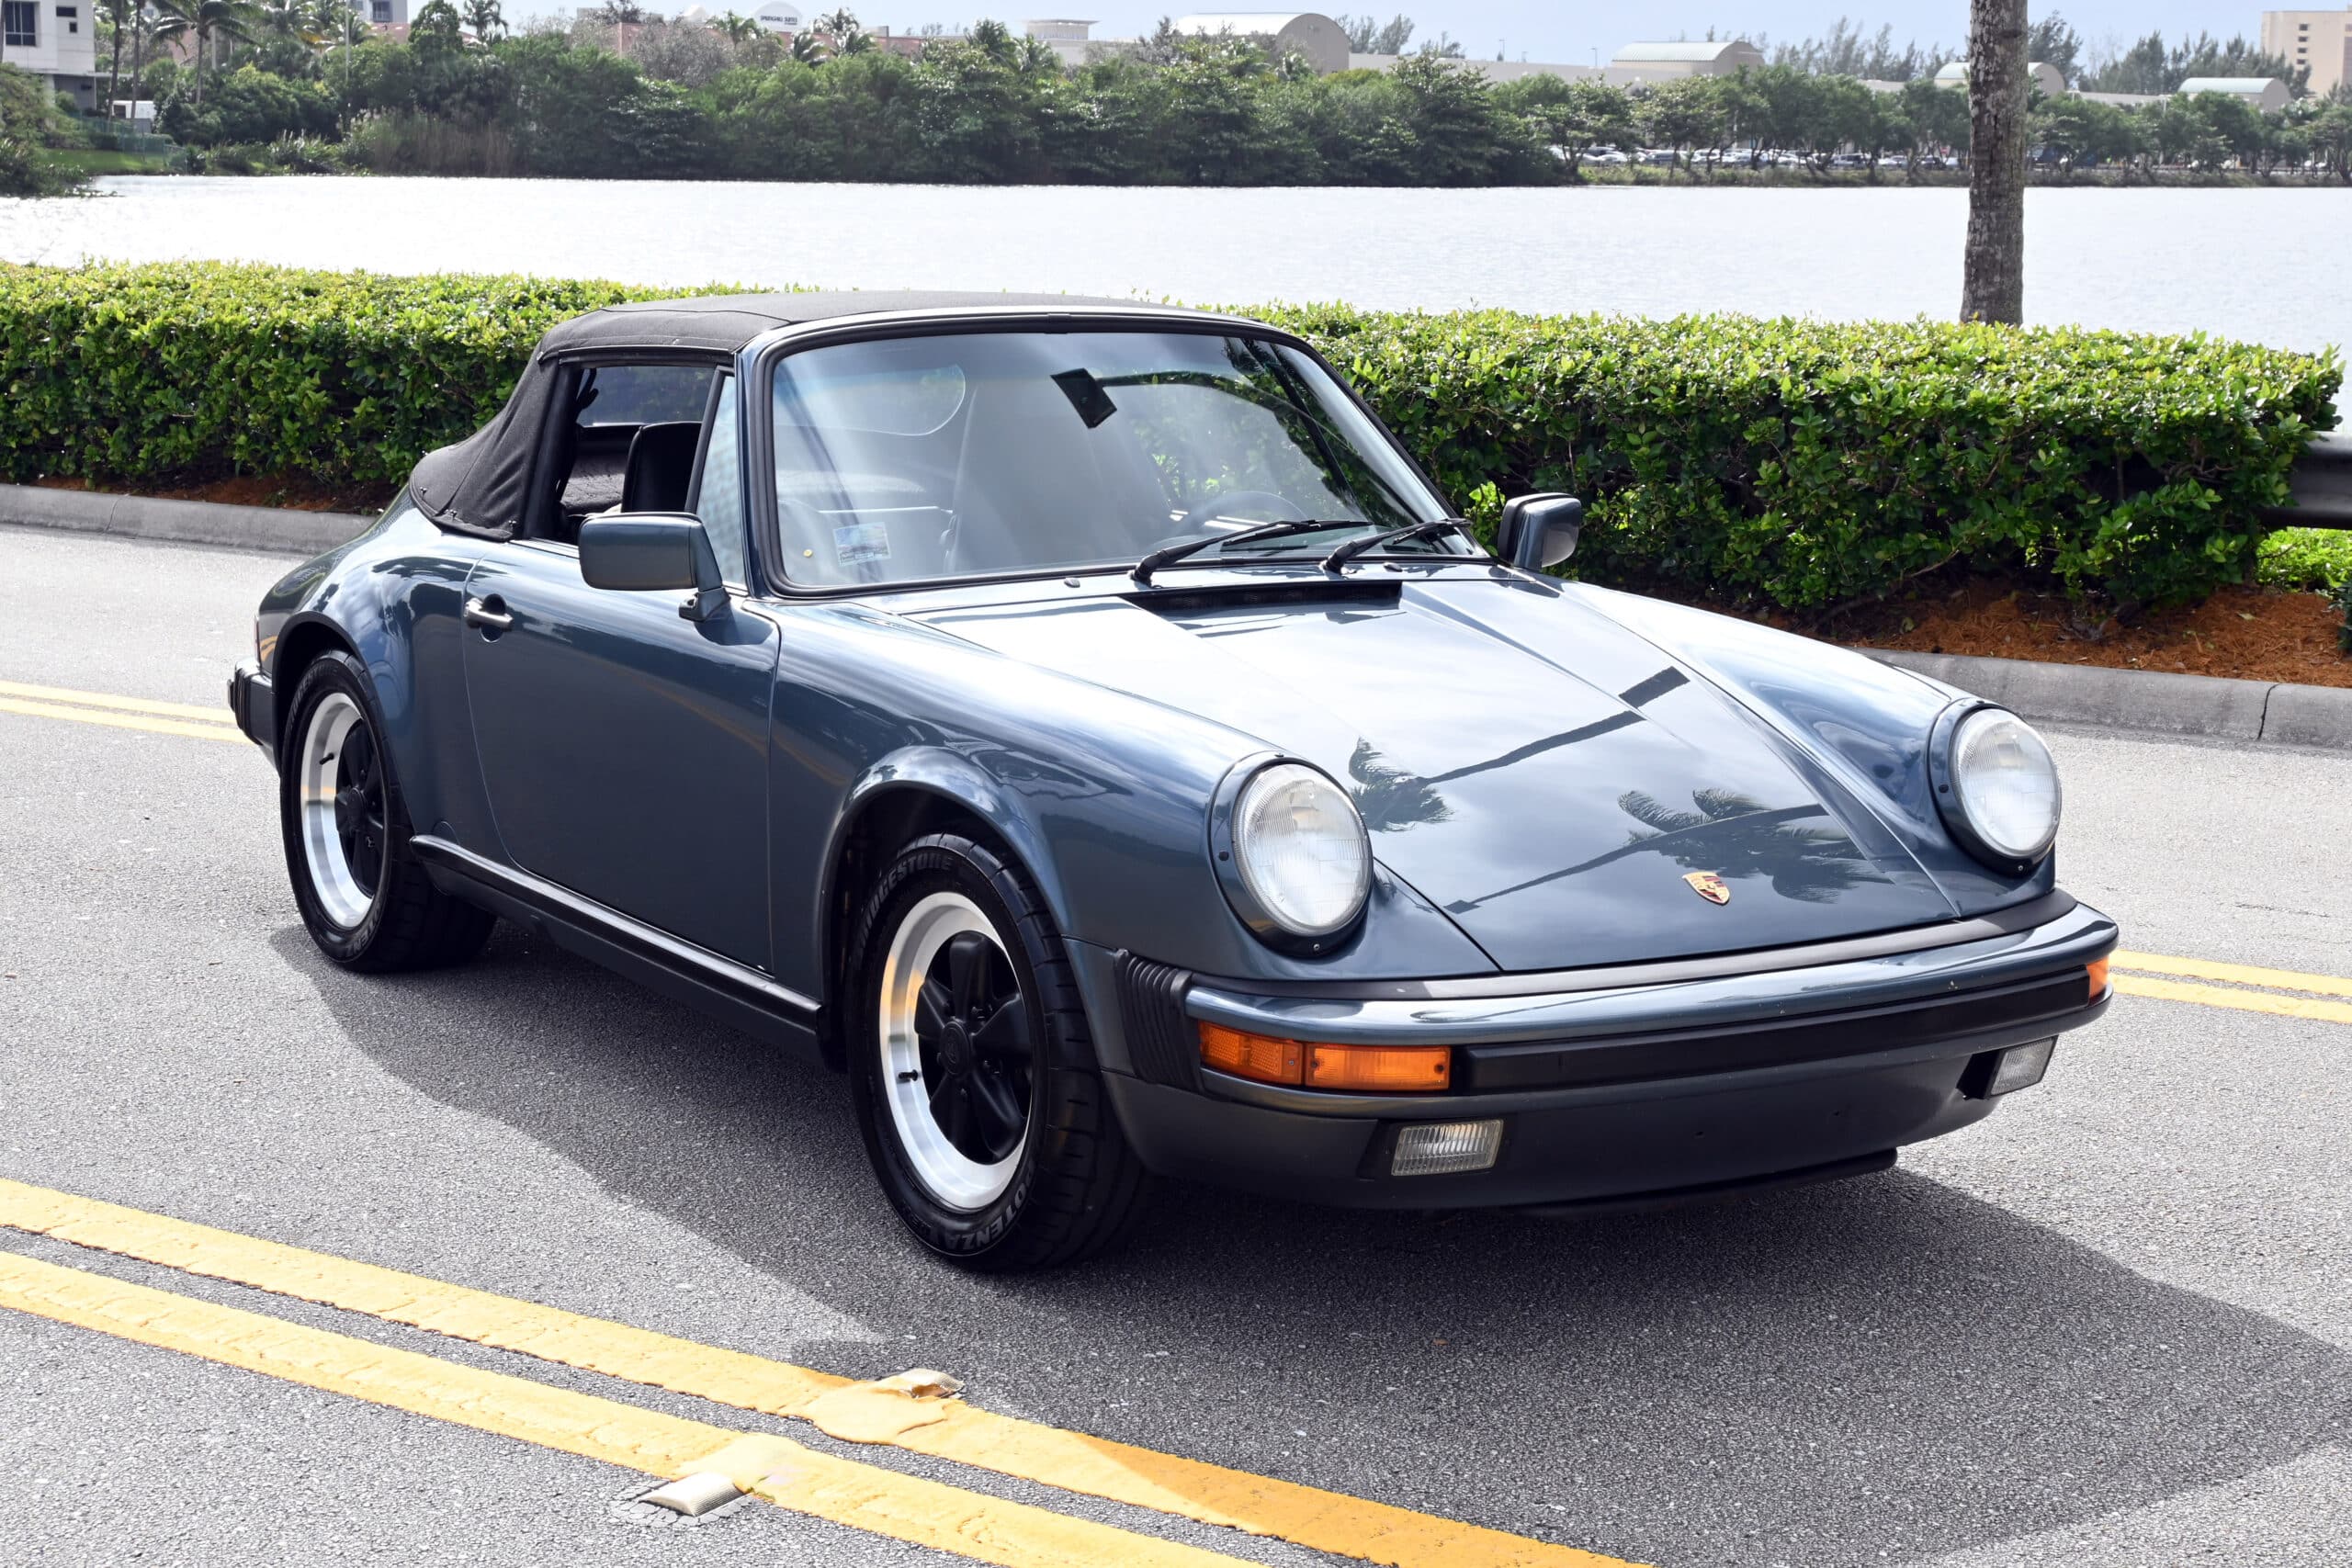 1987 Porsche 911 Carrera, G50 transmission!, documented miles with service records and service manual, outstanding condition, books, tools